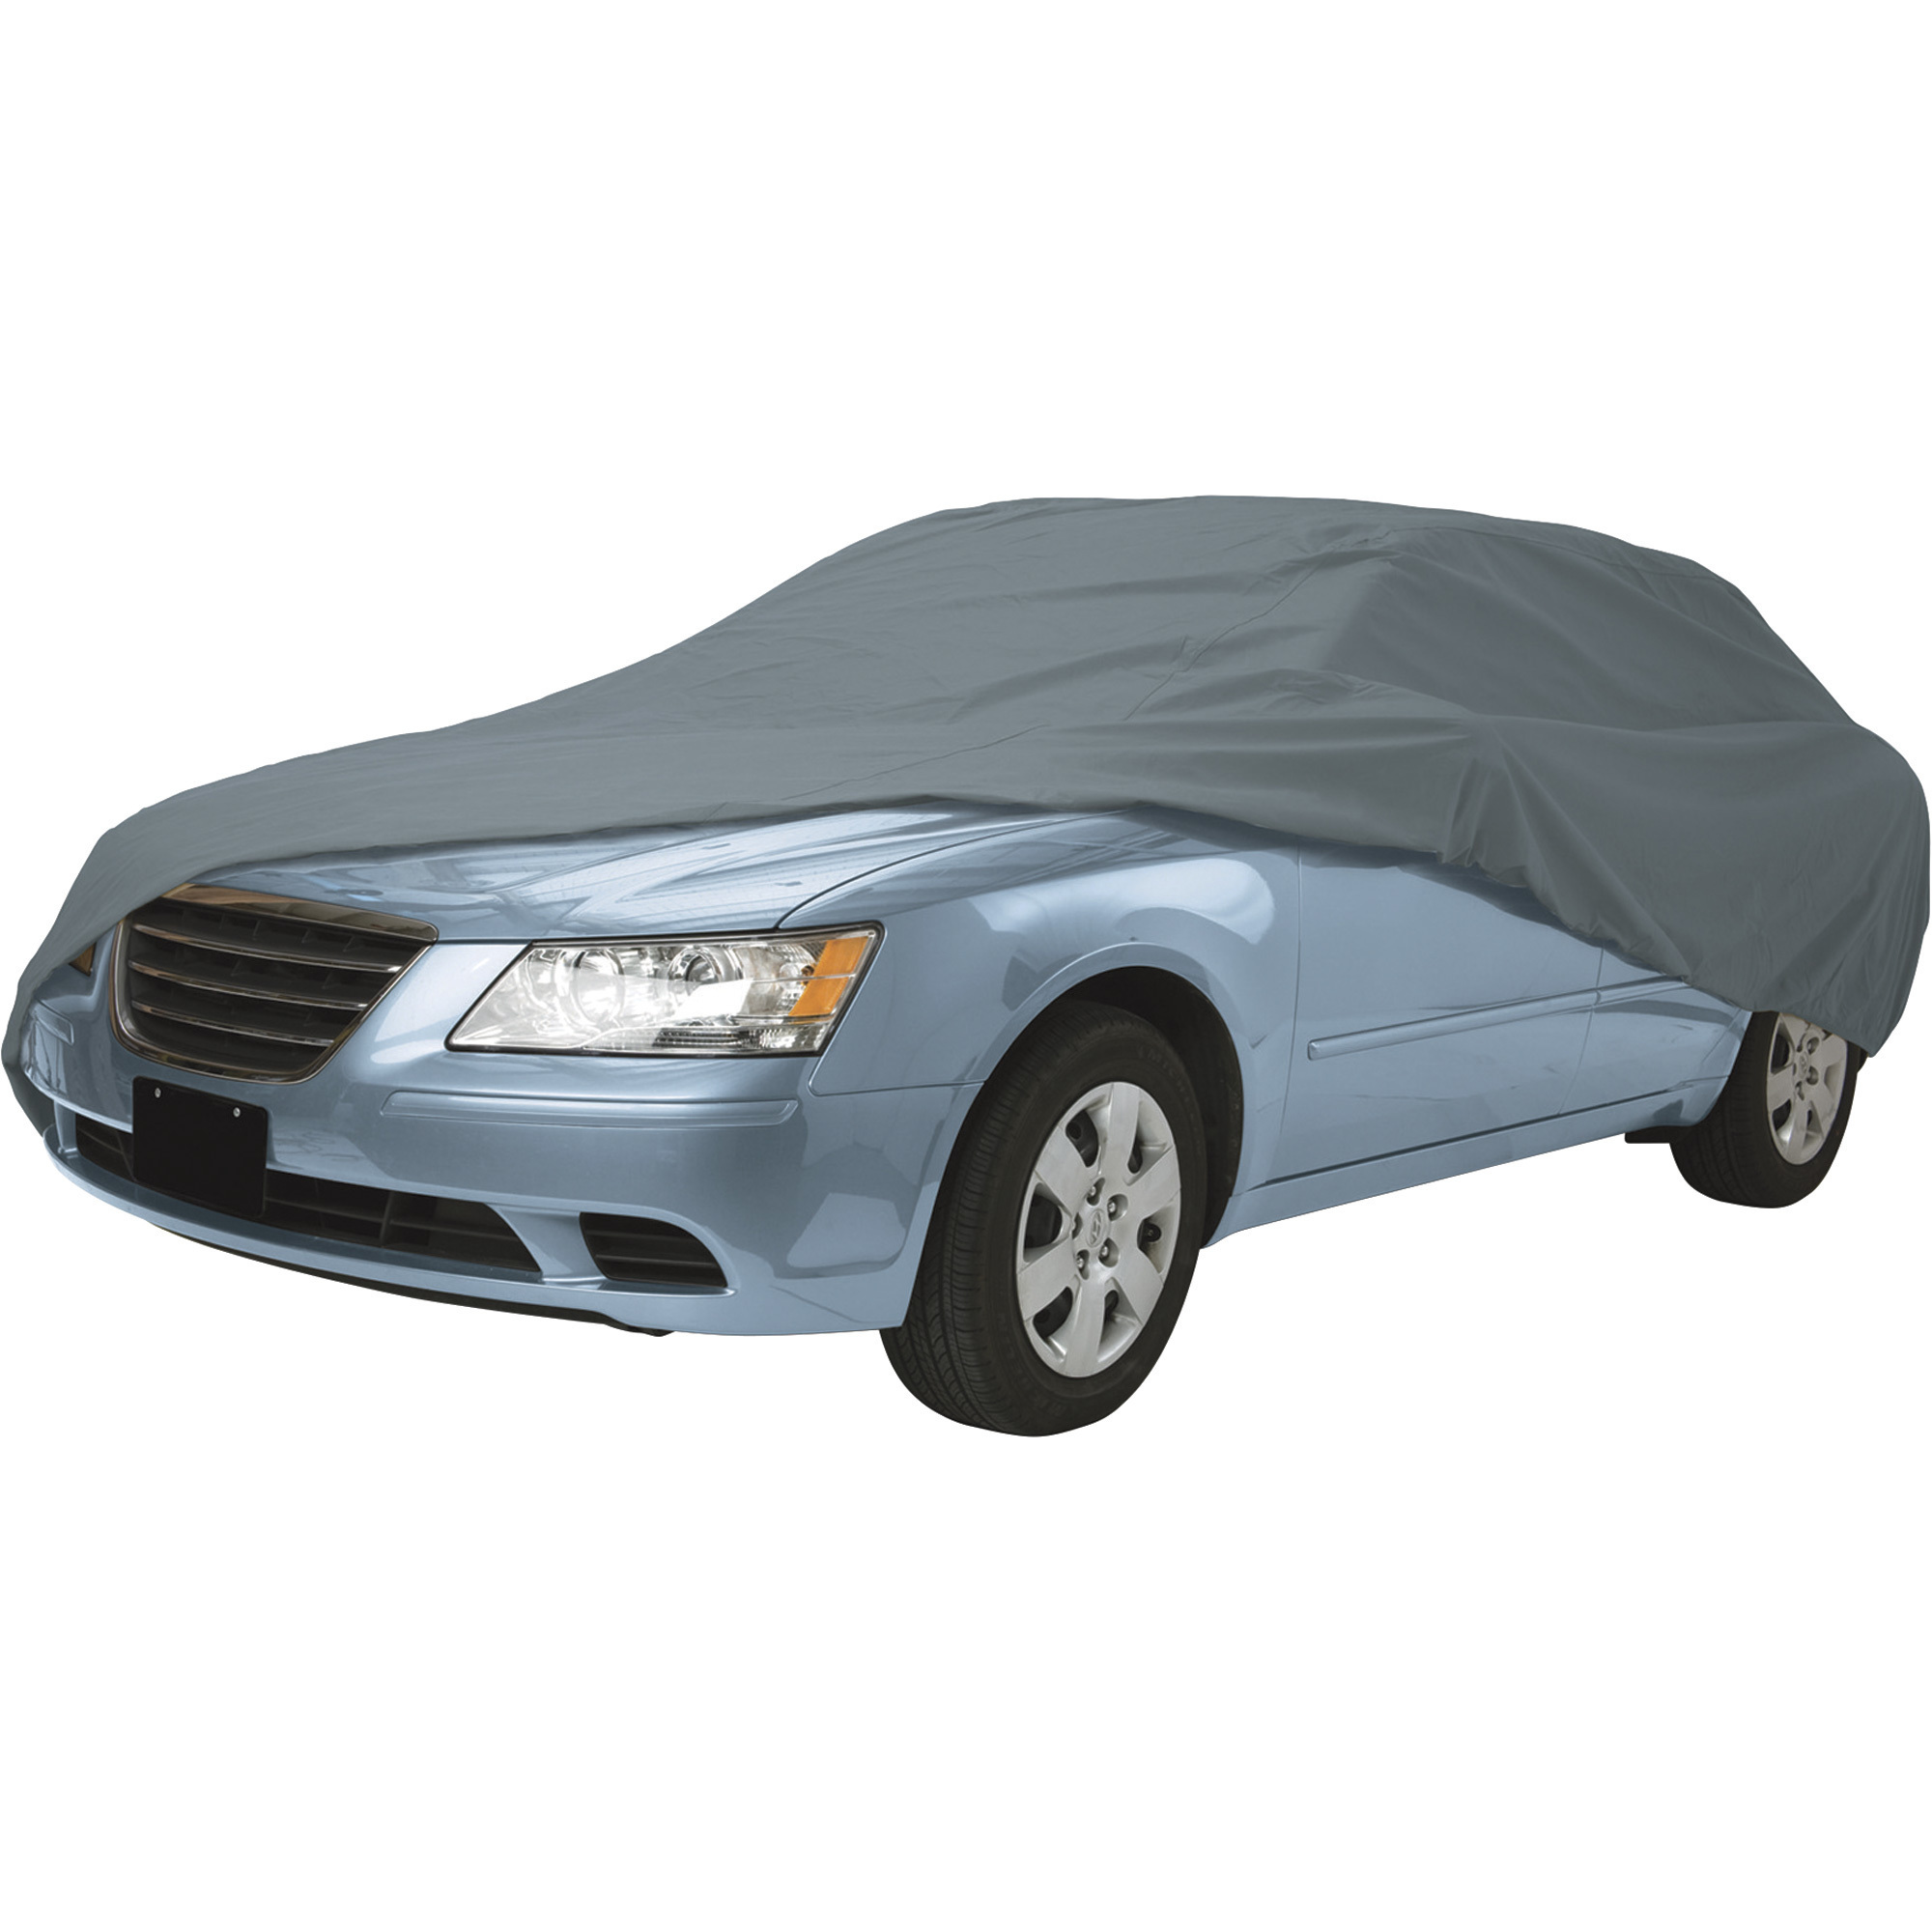 Classic Accessories OverDrive PolyPro 1 Car Cover, Fits Mid-Size Sedans 176Inch-190Inch L, Model 10-012-251001-00